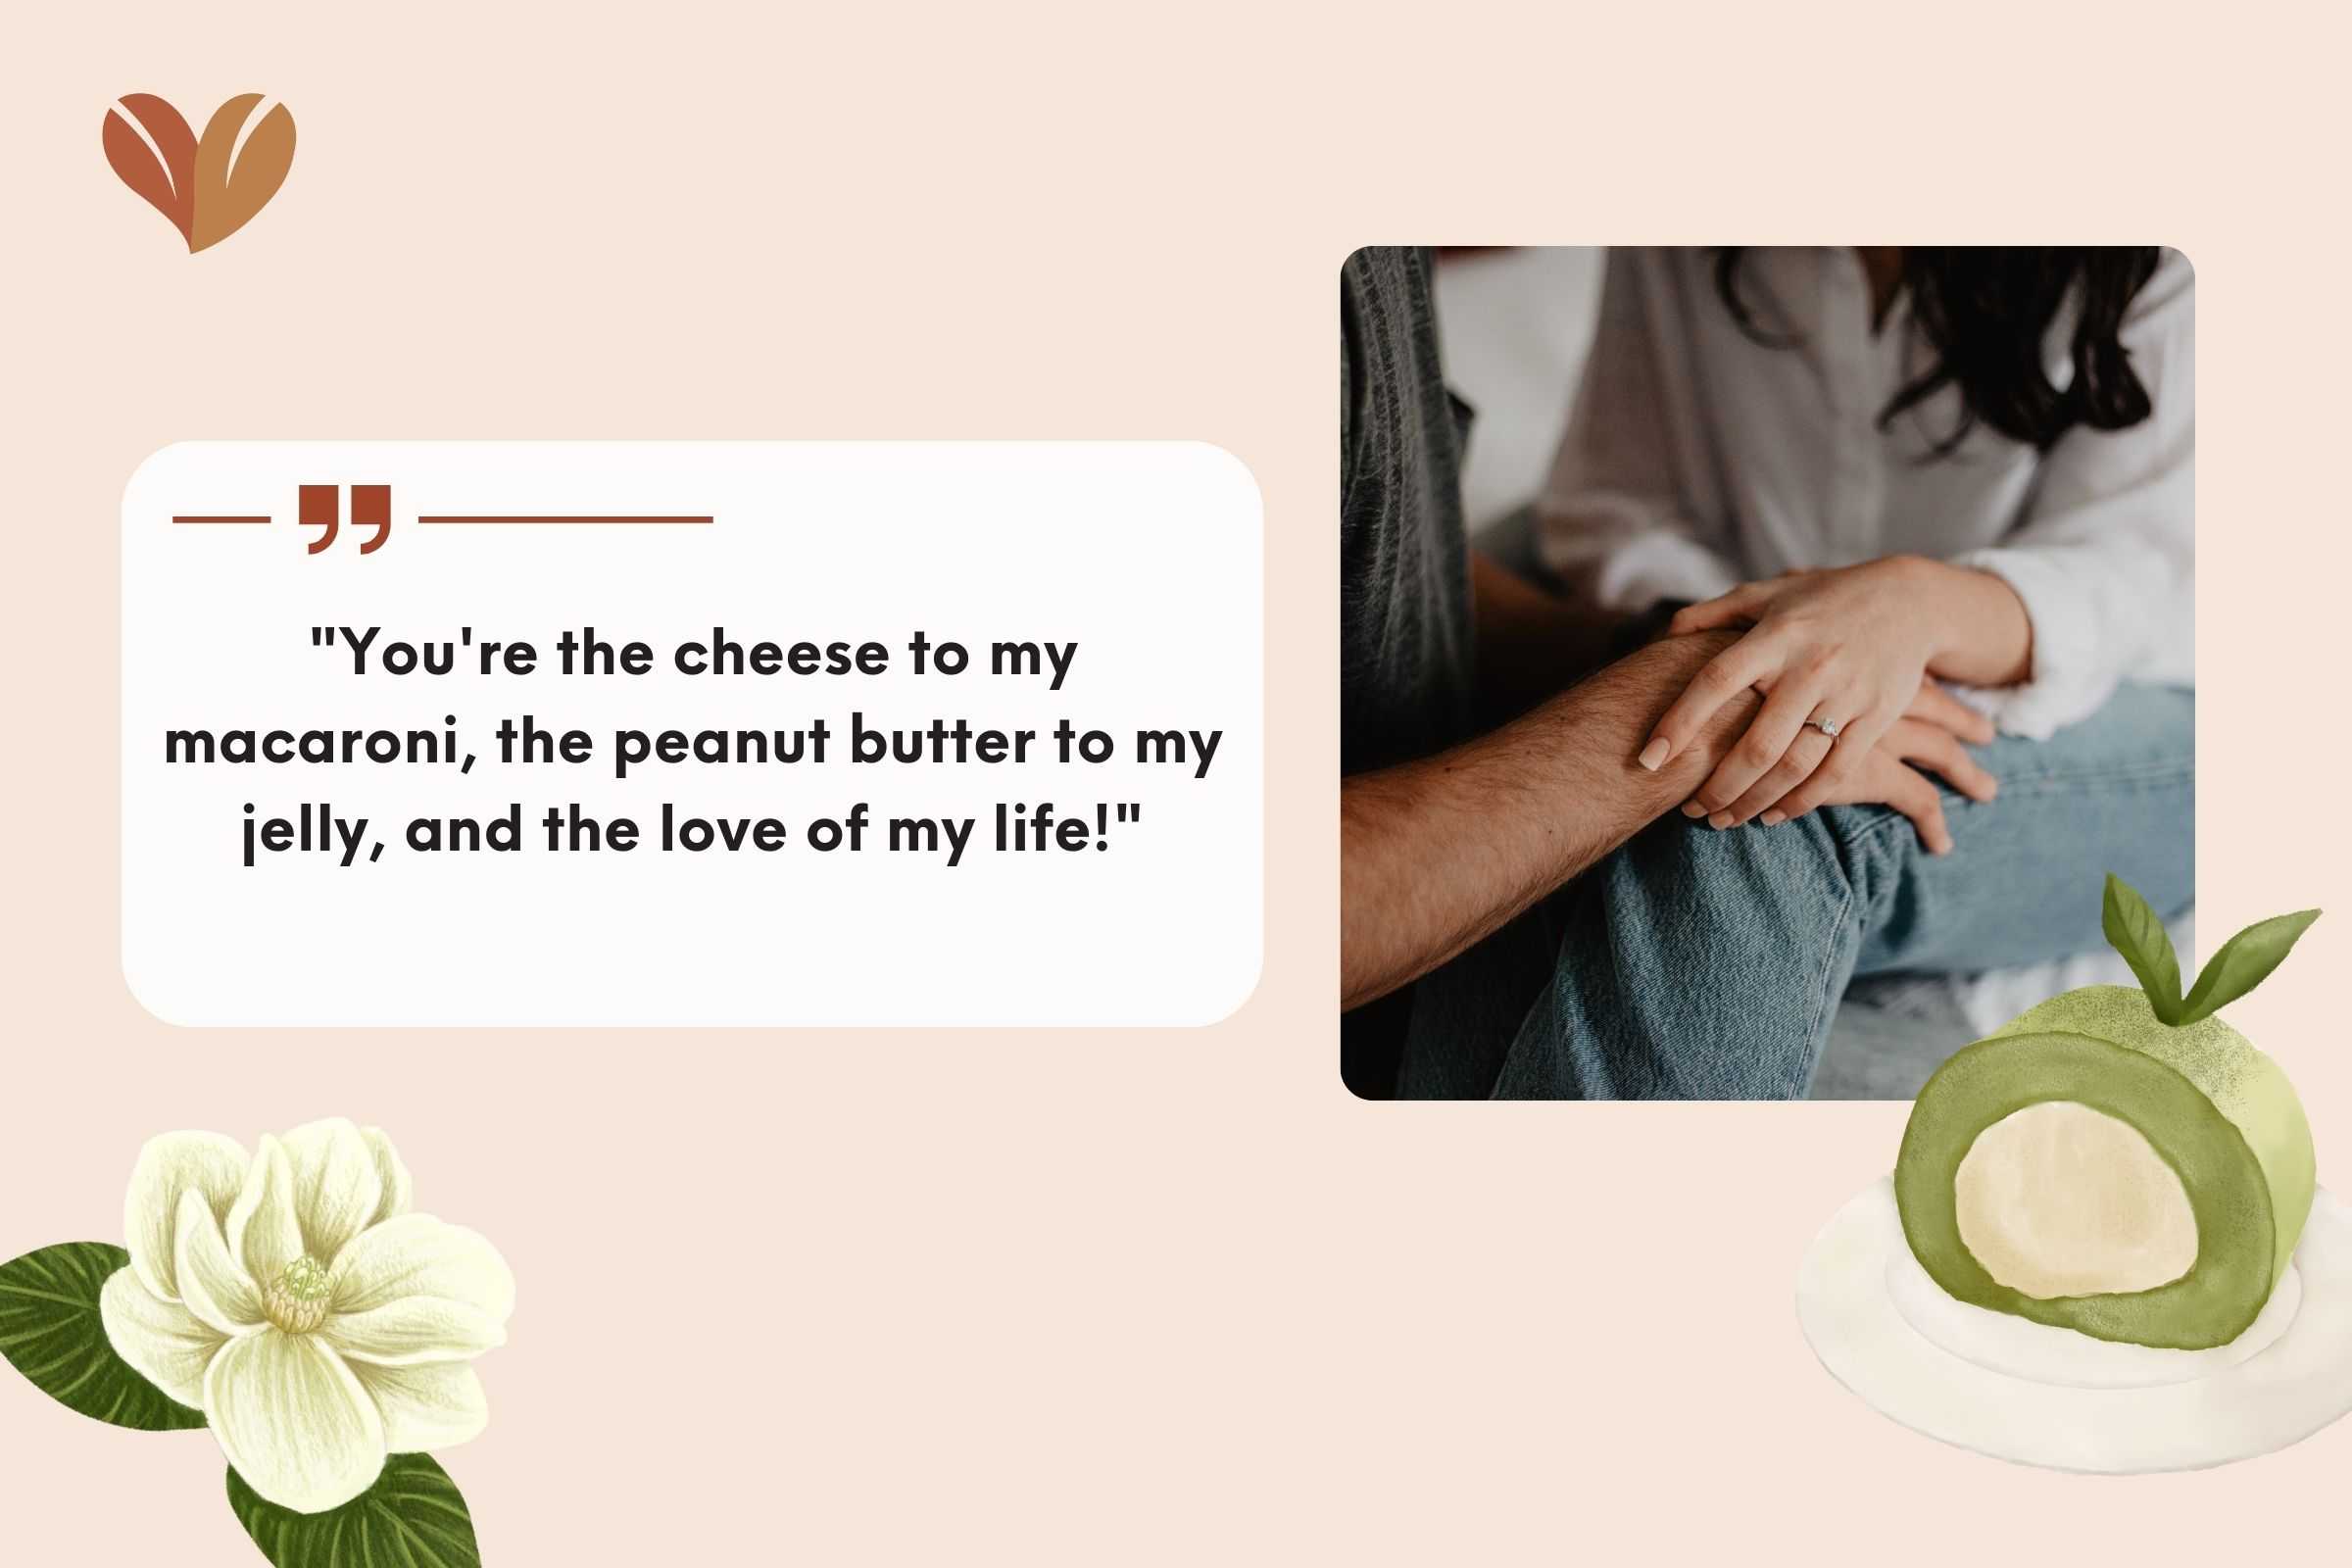 "You're the cheese to my macaroni, the peanut butter to my jelly, and the love of my life!"